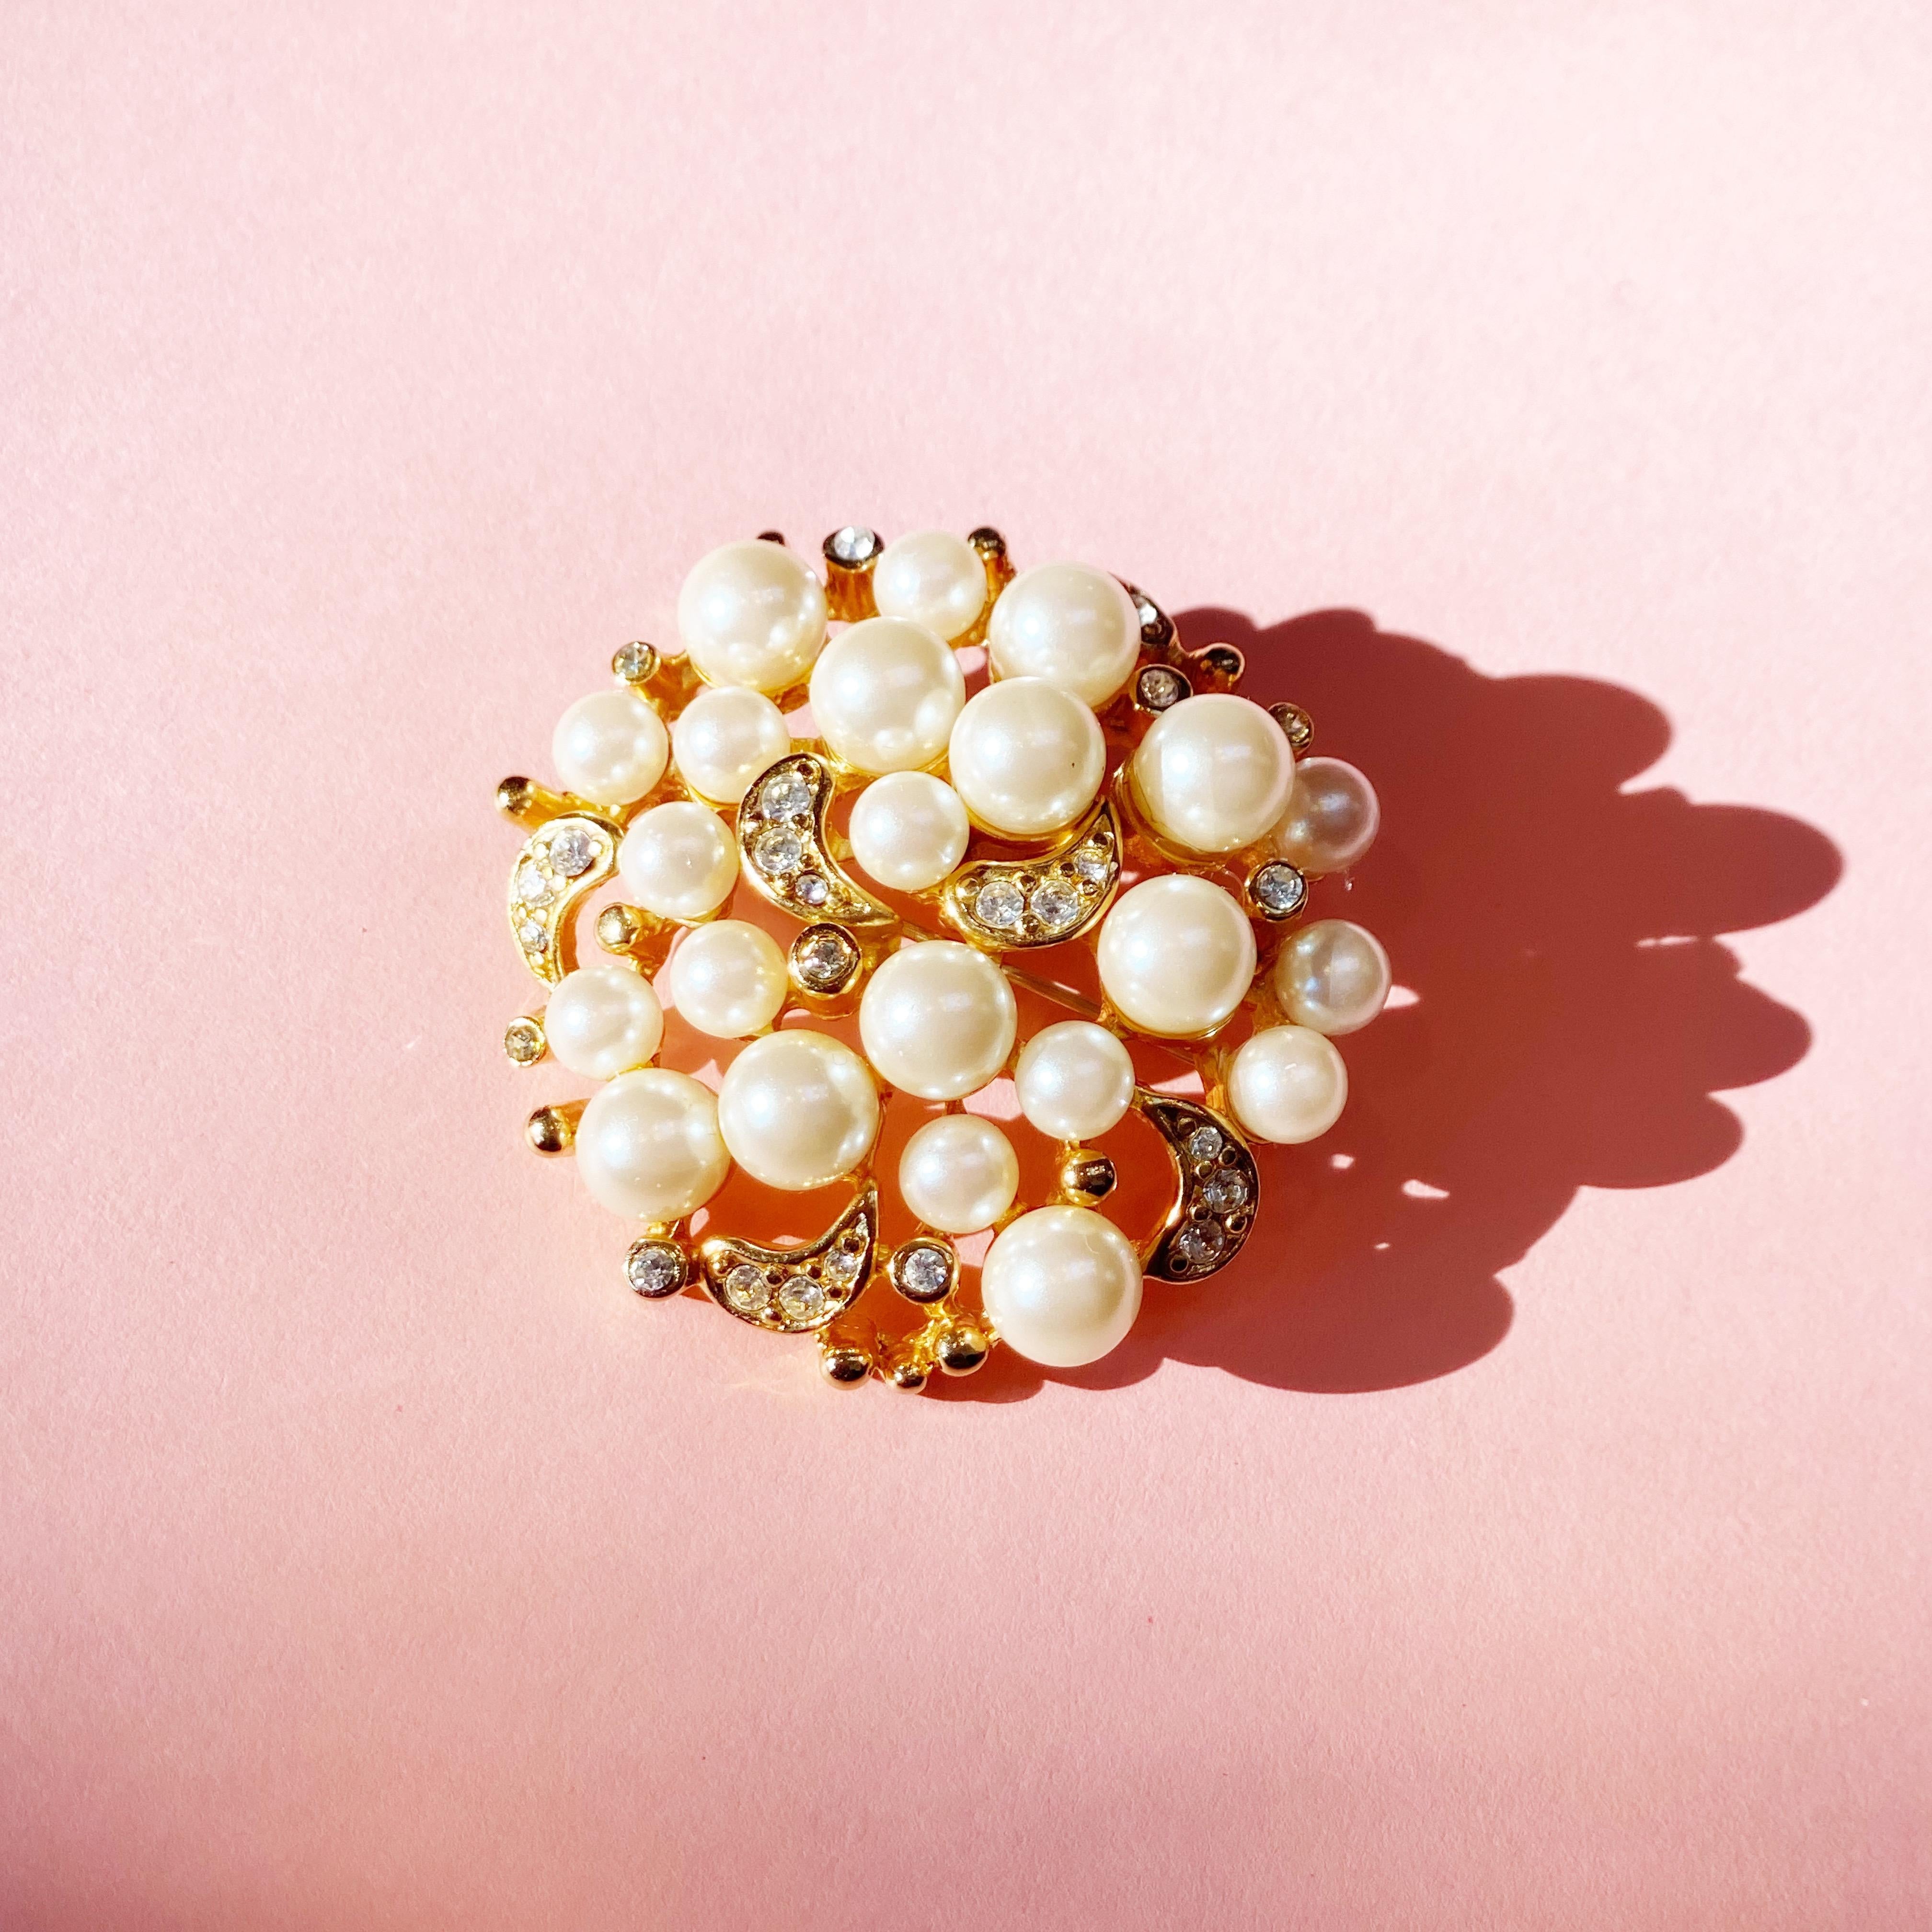 Vintage Gilt Pearl Cluster Brooch with Crystal Rhinestones by Erwin Pearl, 1980s 1